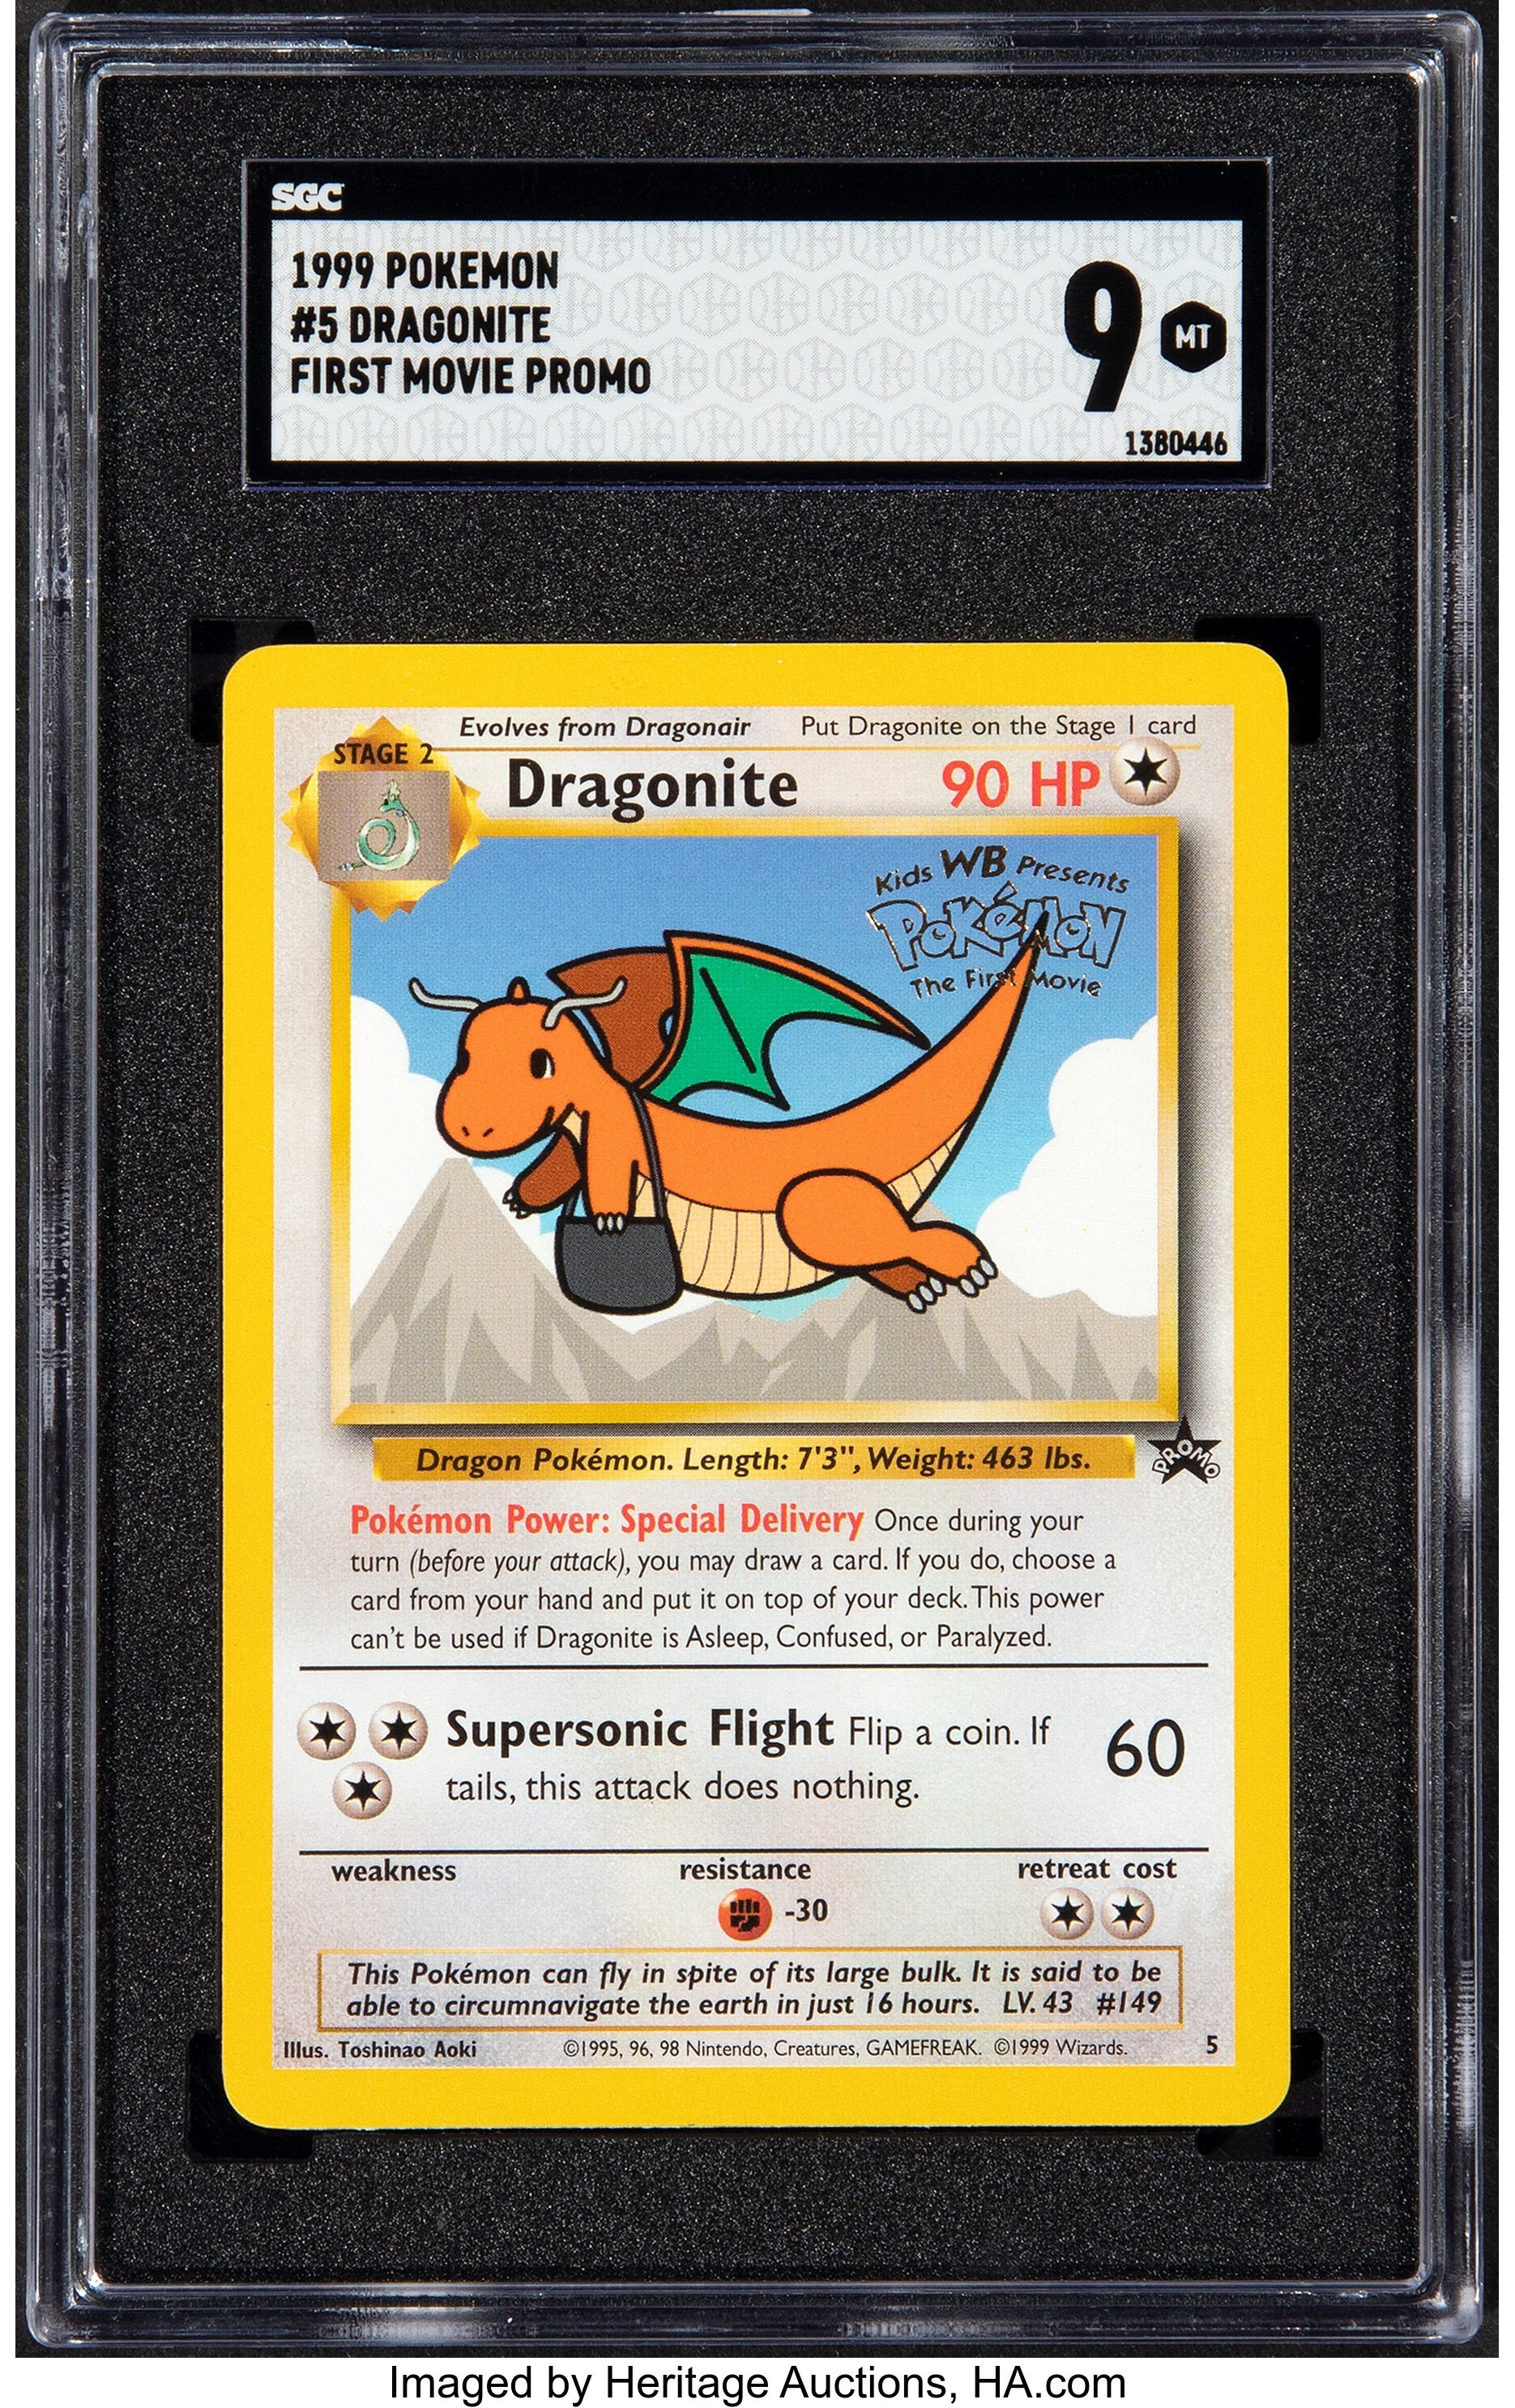 1999 Pokemon Dragonite 5 First Movie Promo Sgc Mint 9 Lot Heritage Auctions